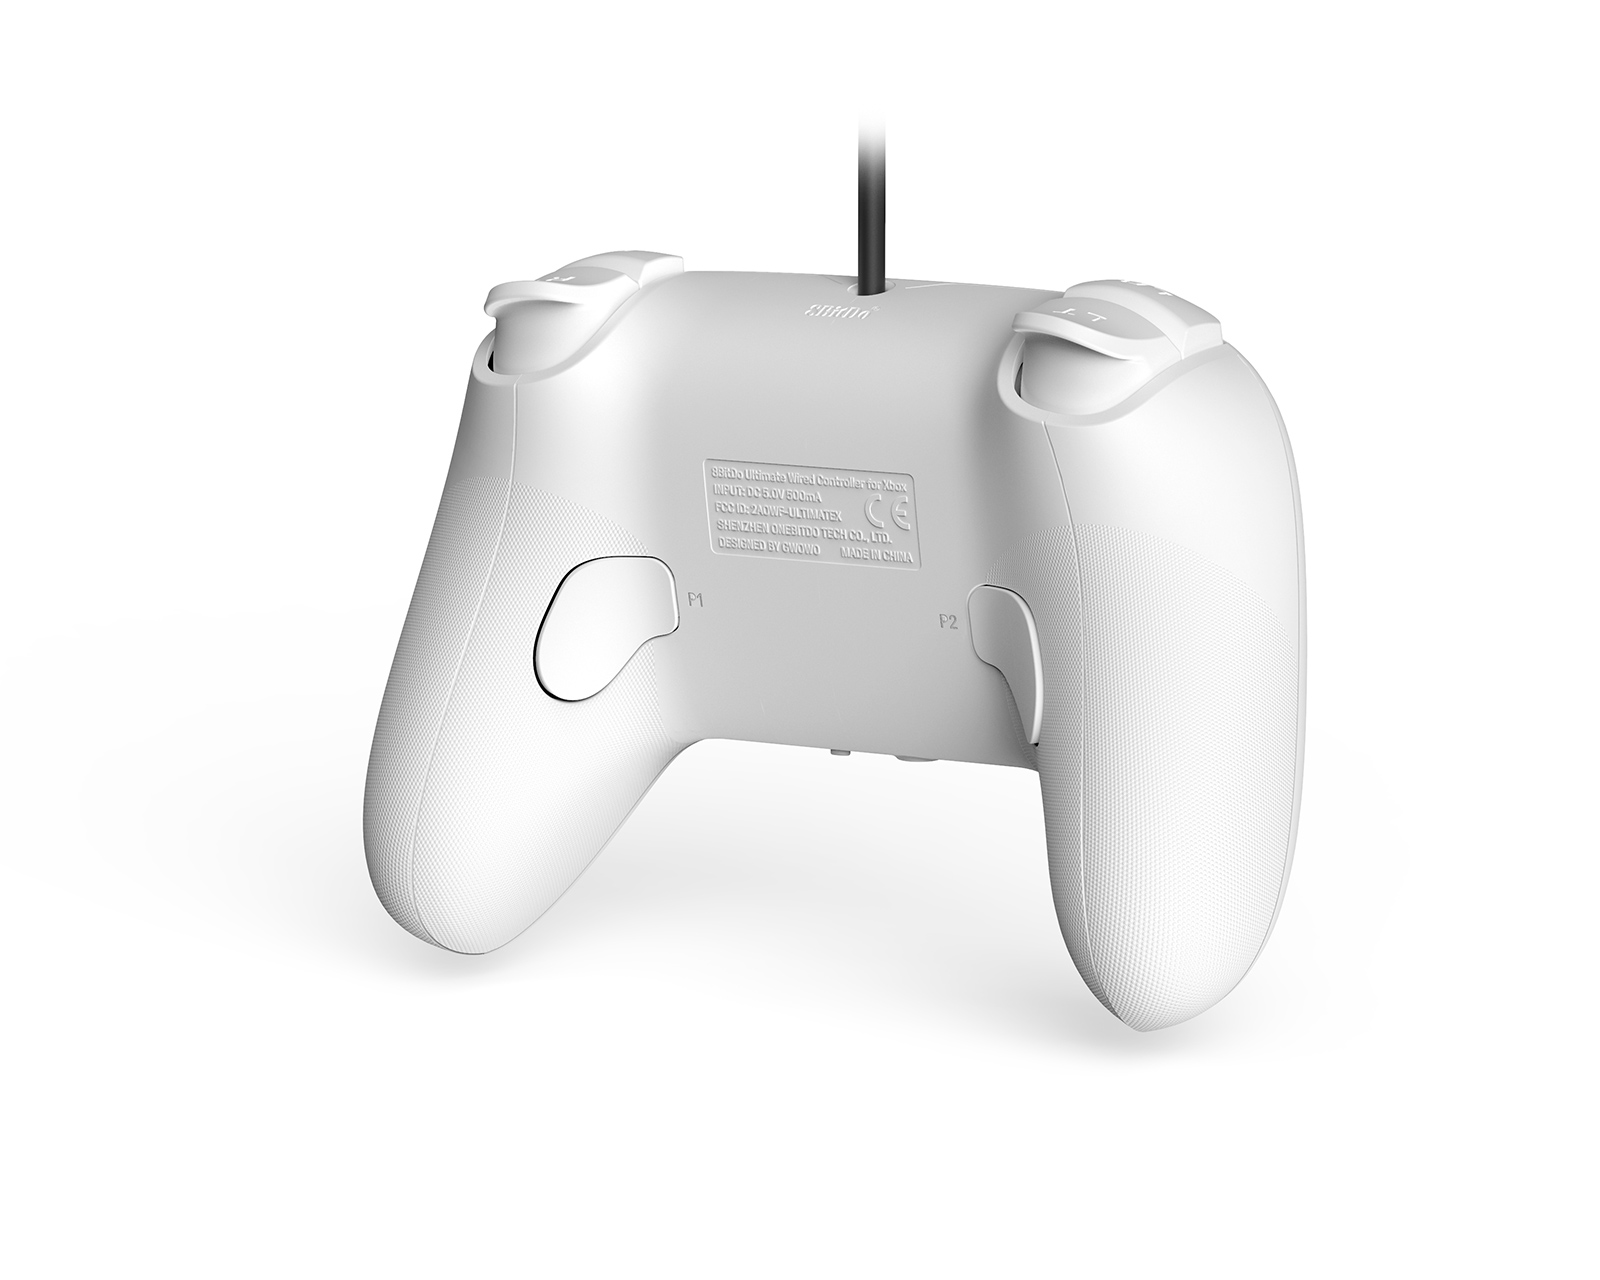 8Bitdo Ultimate Wired Controller for Xbox - Officially Licensed (White) 